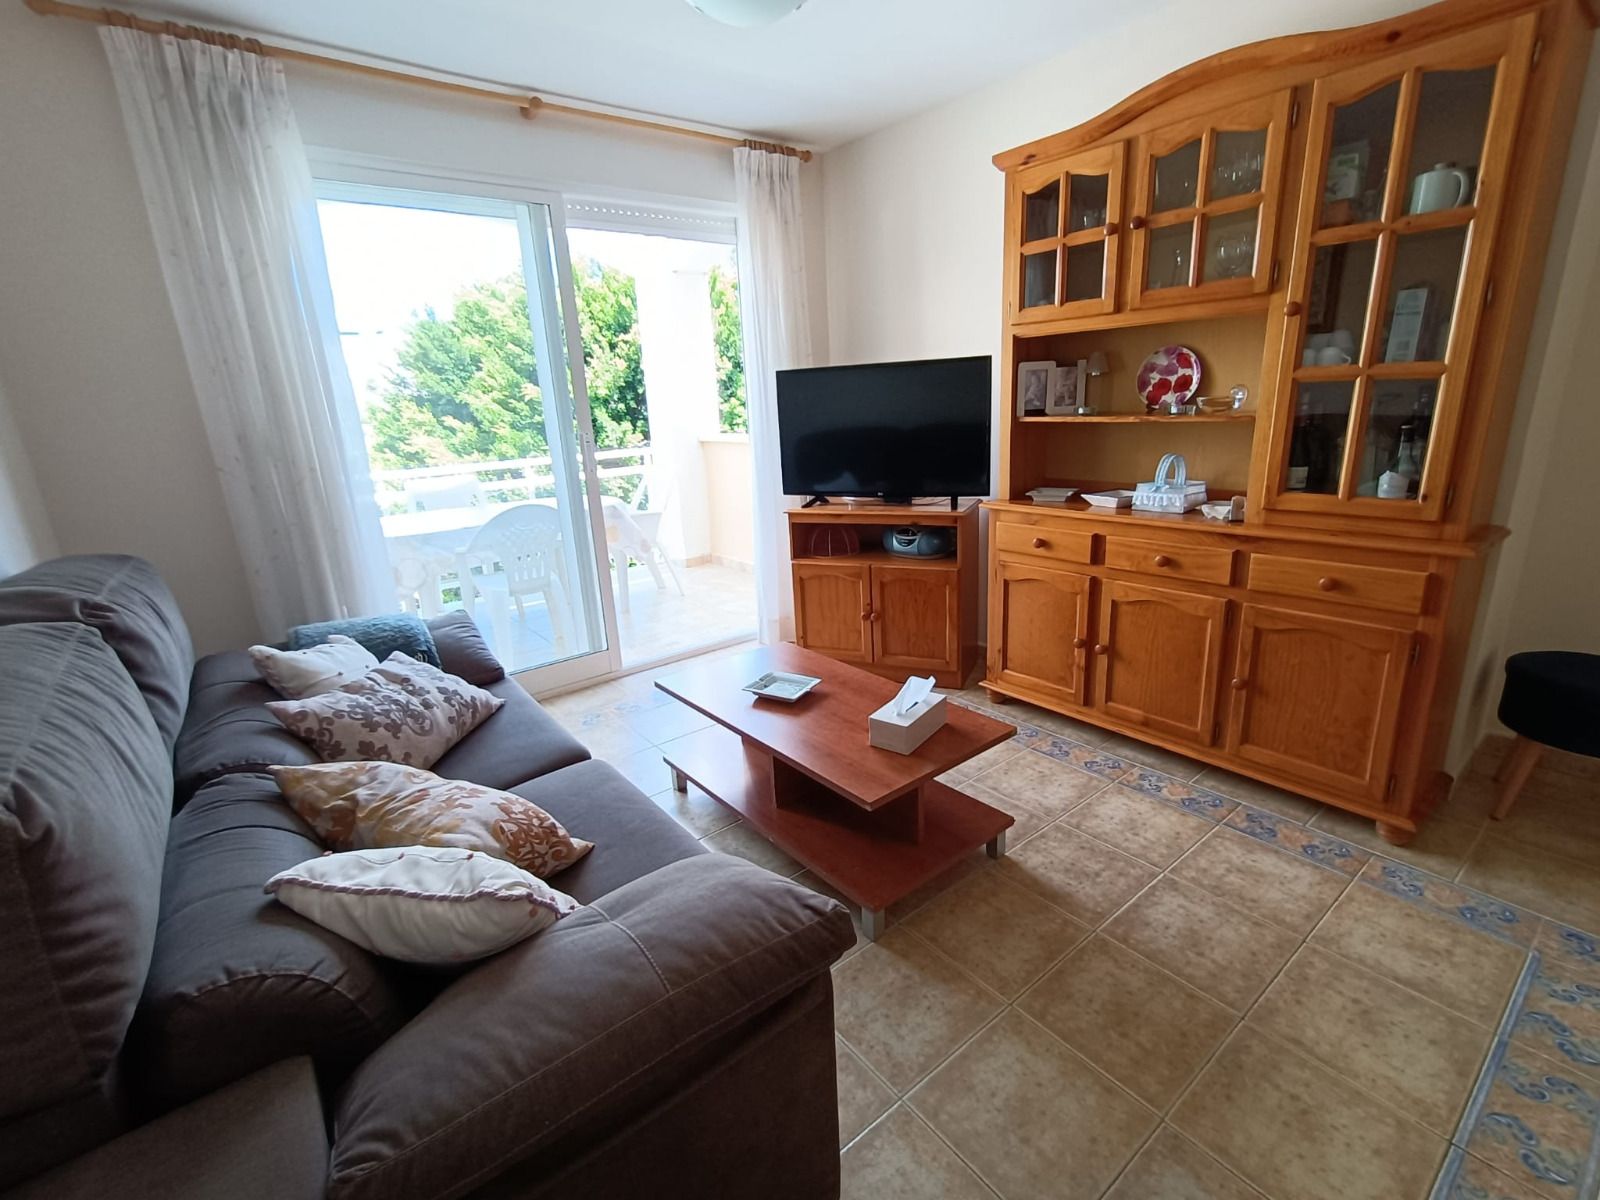 Duplex Penthouse in Denia near the Sea and the Town